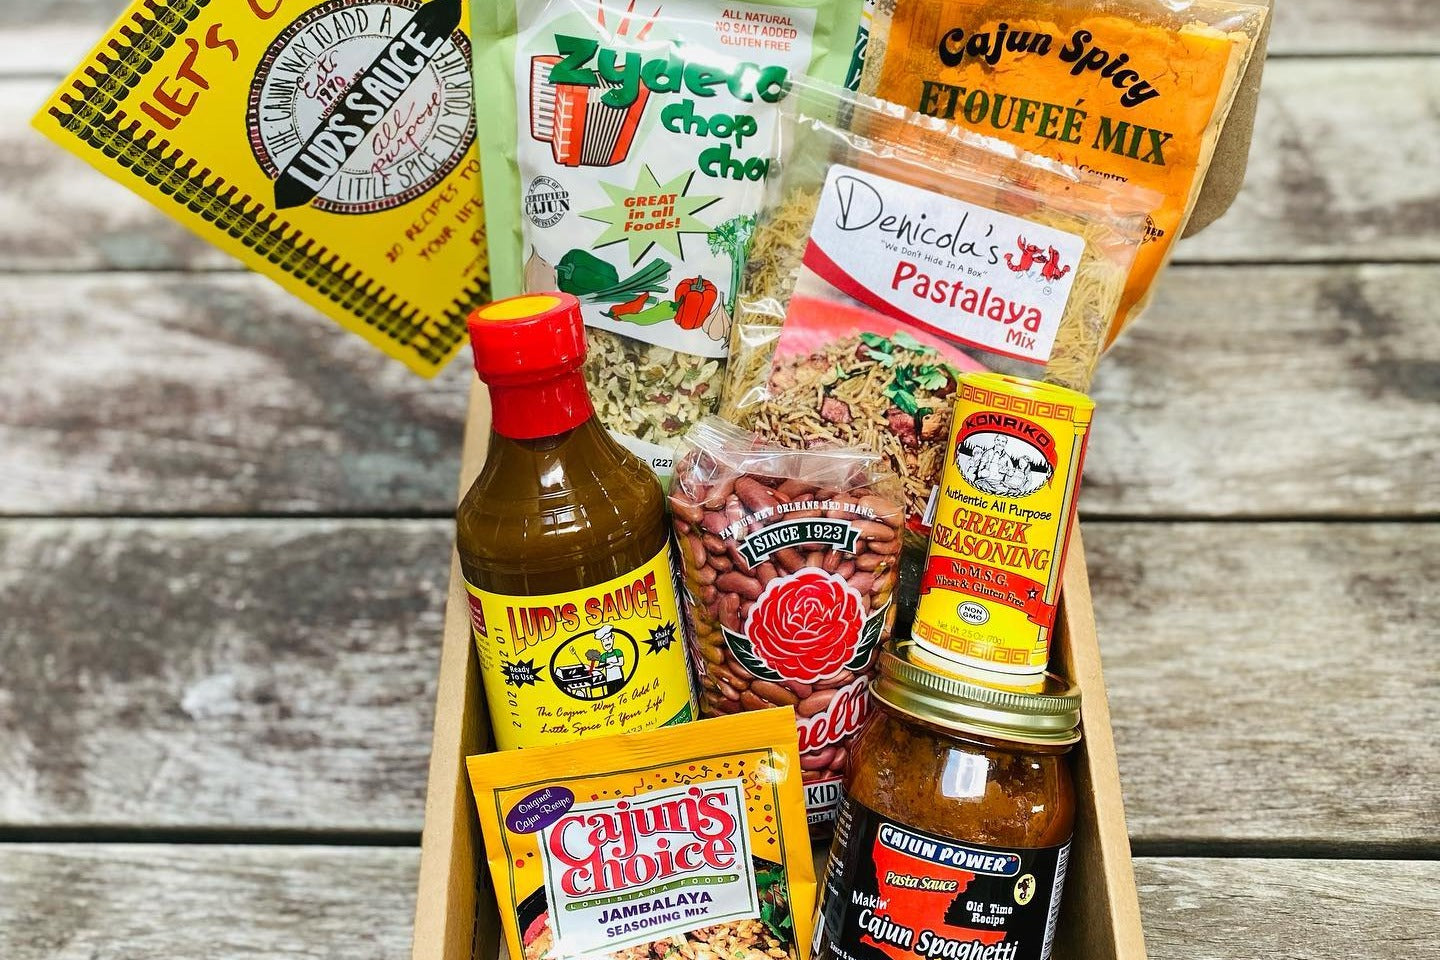 Buy DIY ARTISAN HOT SAUCE MAKING KIT Everything Included, July 4th  Grilling Sauce Best Gift For Dad, Husband, Friend, & Loved Ones, Make Your  Own Gourmet Hot Sauce